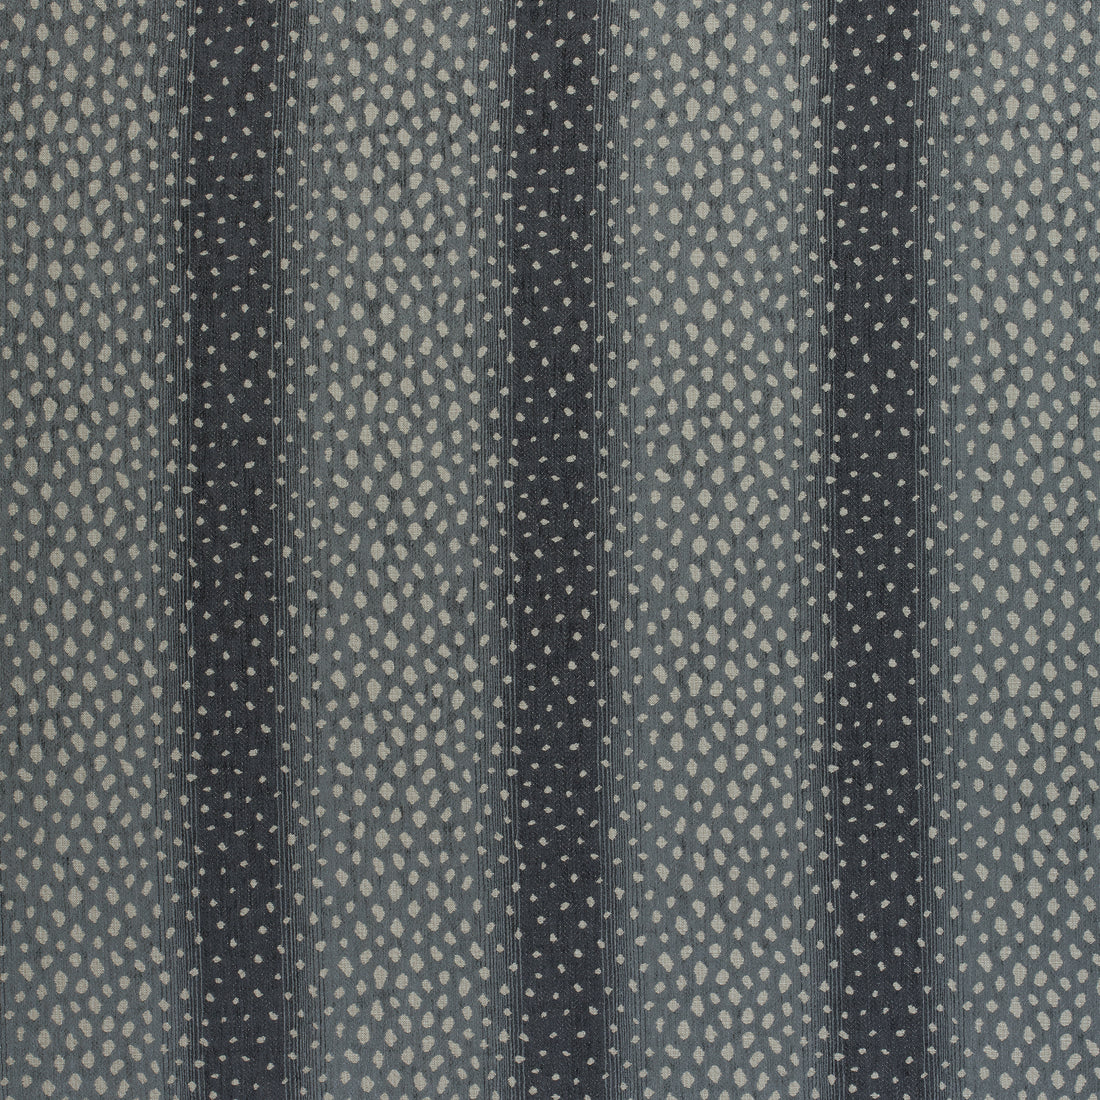 Gazelle fabric in charcoal color - pattern number W80431 - by Thibaut in the Woven Resource Vol 10 Menagerie collection